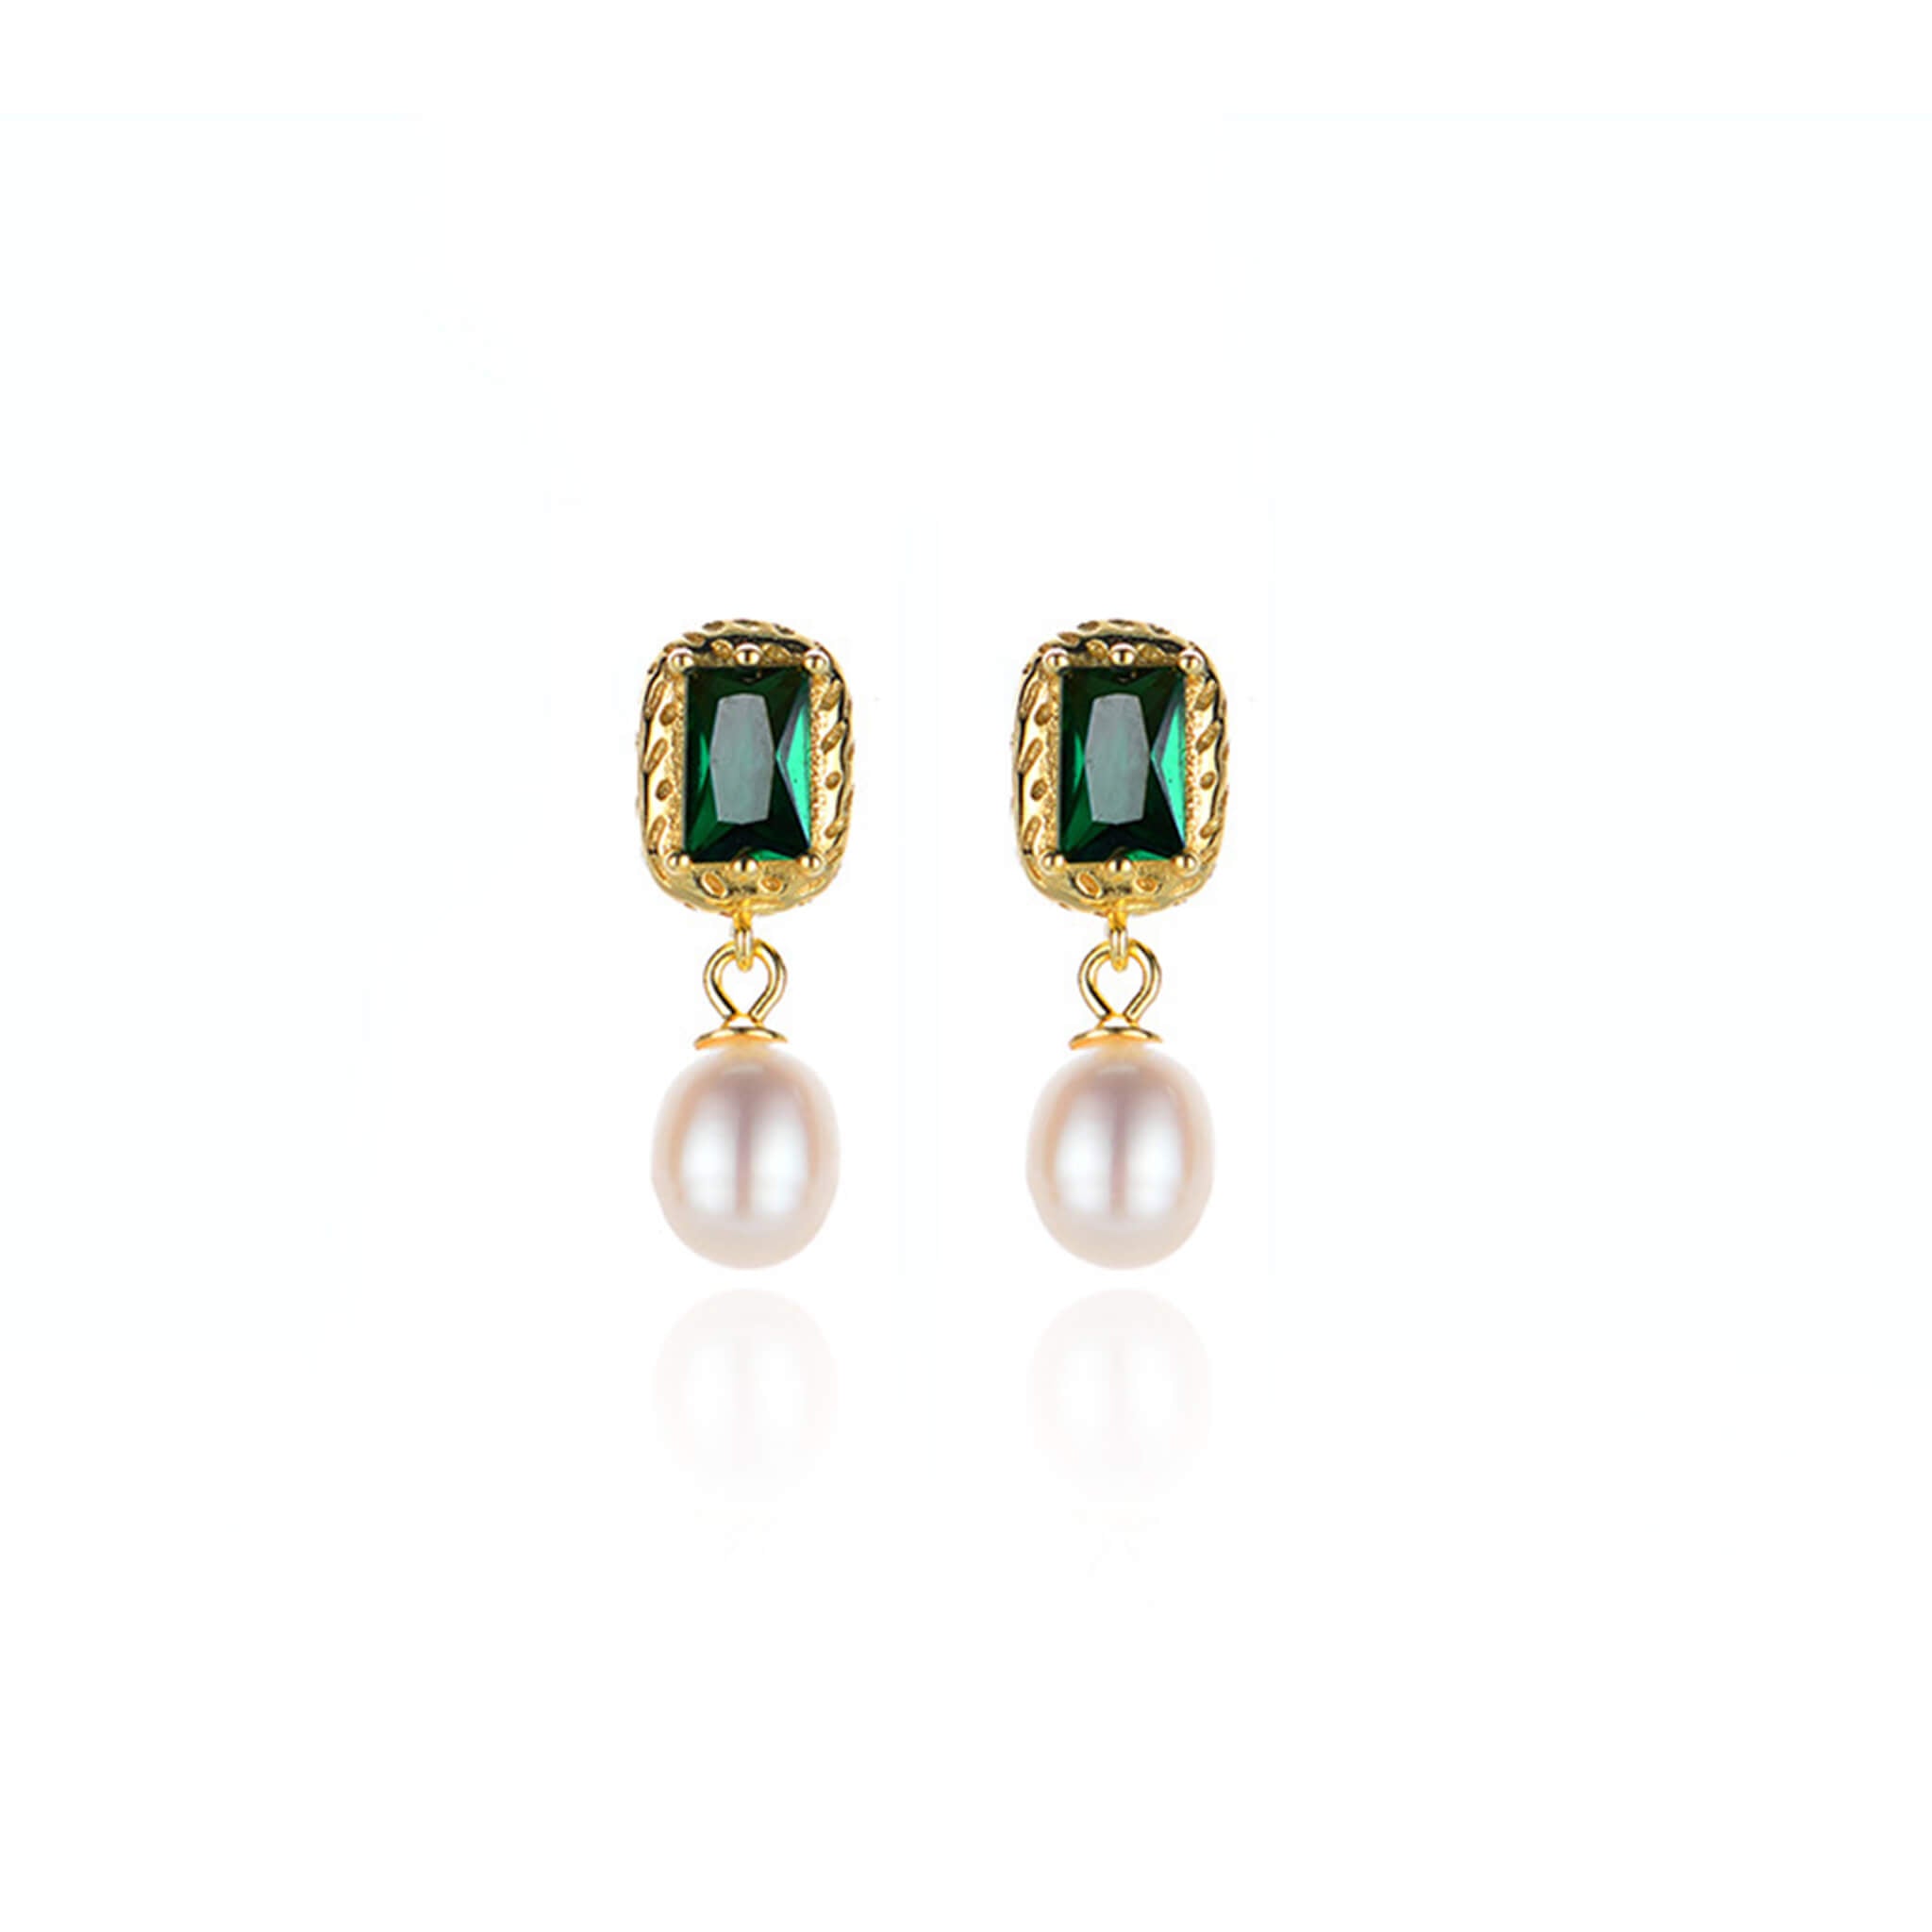 925 Silver French Vintage Green Zircon Freshwater Pearl Elegant Courtly Earrings  UponBasics Silver  